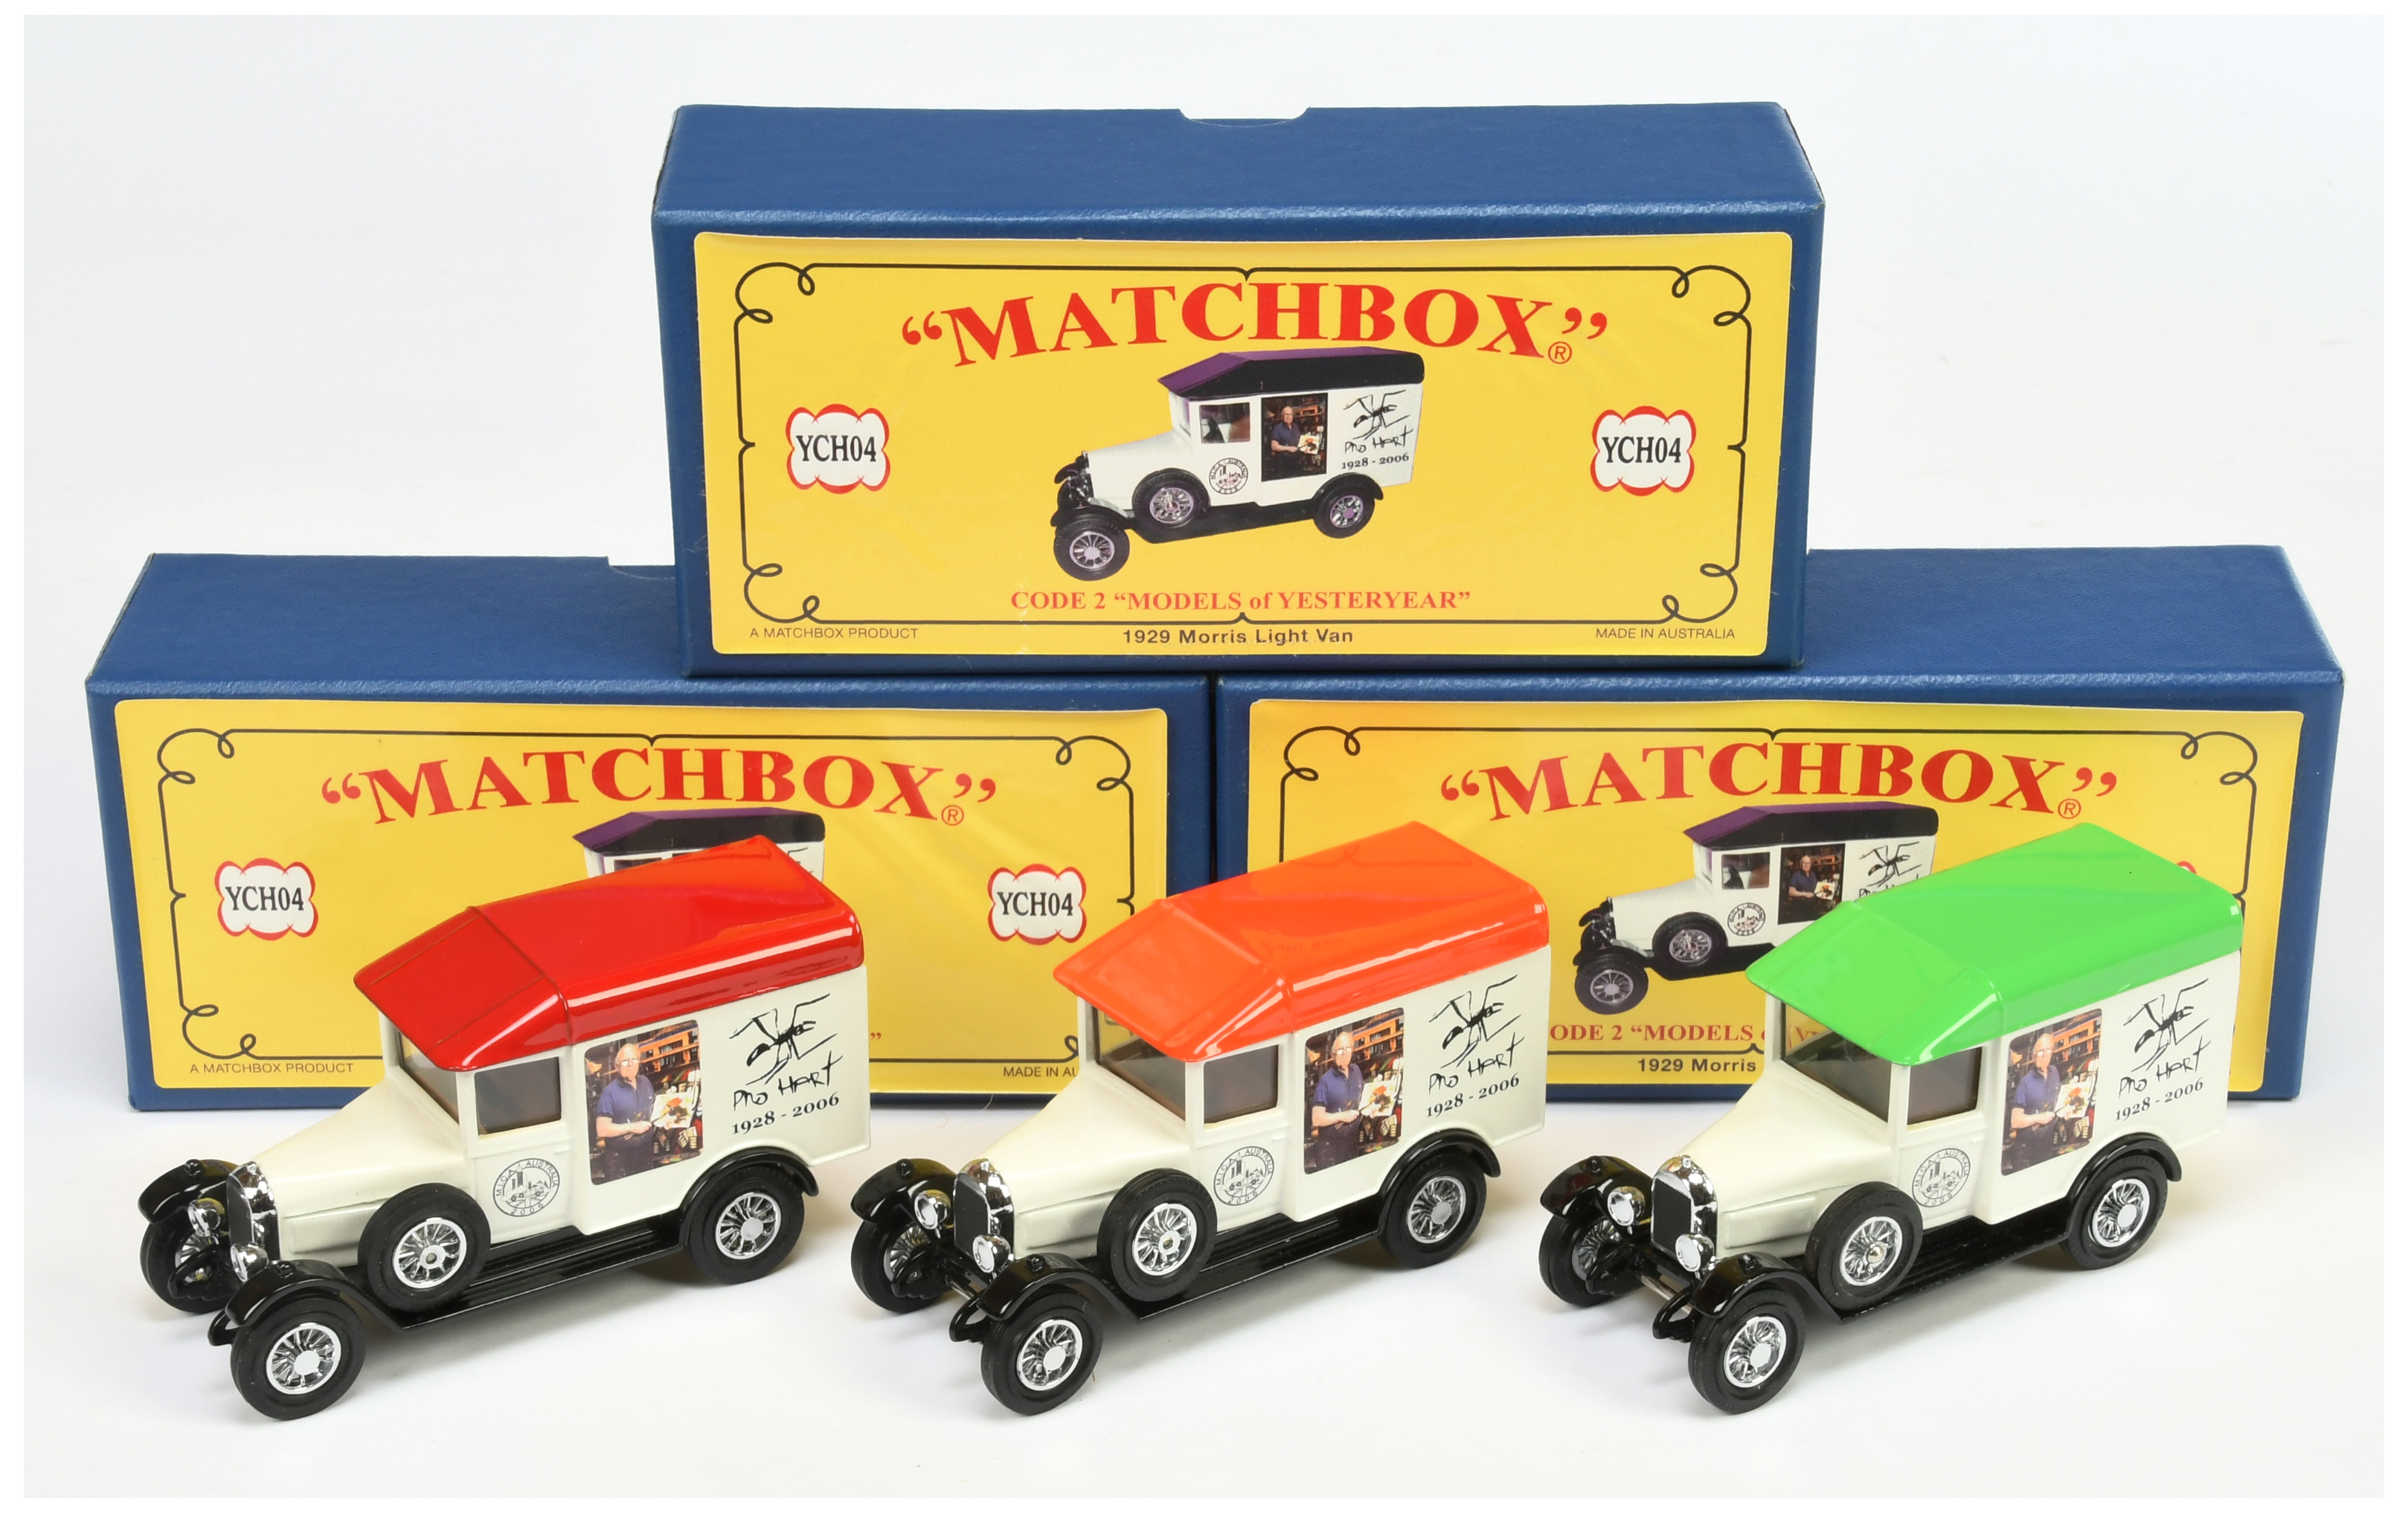 Matchbox Models of Yesteryear Code 2 issues "Pro Hart 1928-2006" all are limited edition 1 of 20 ...